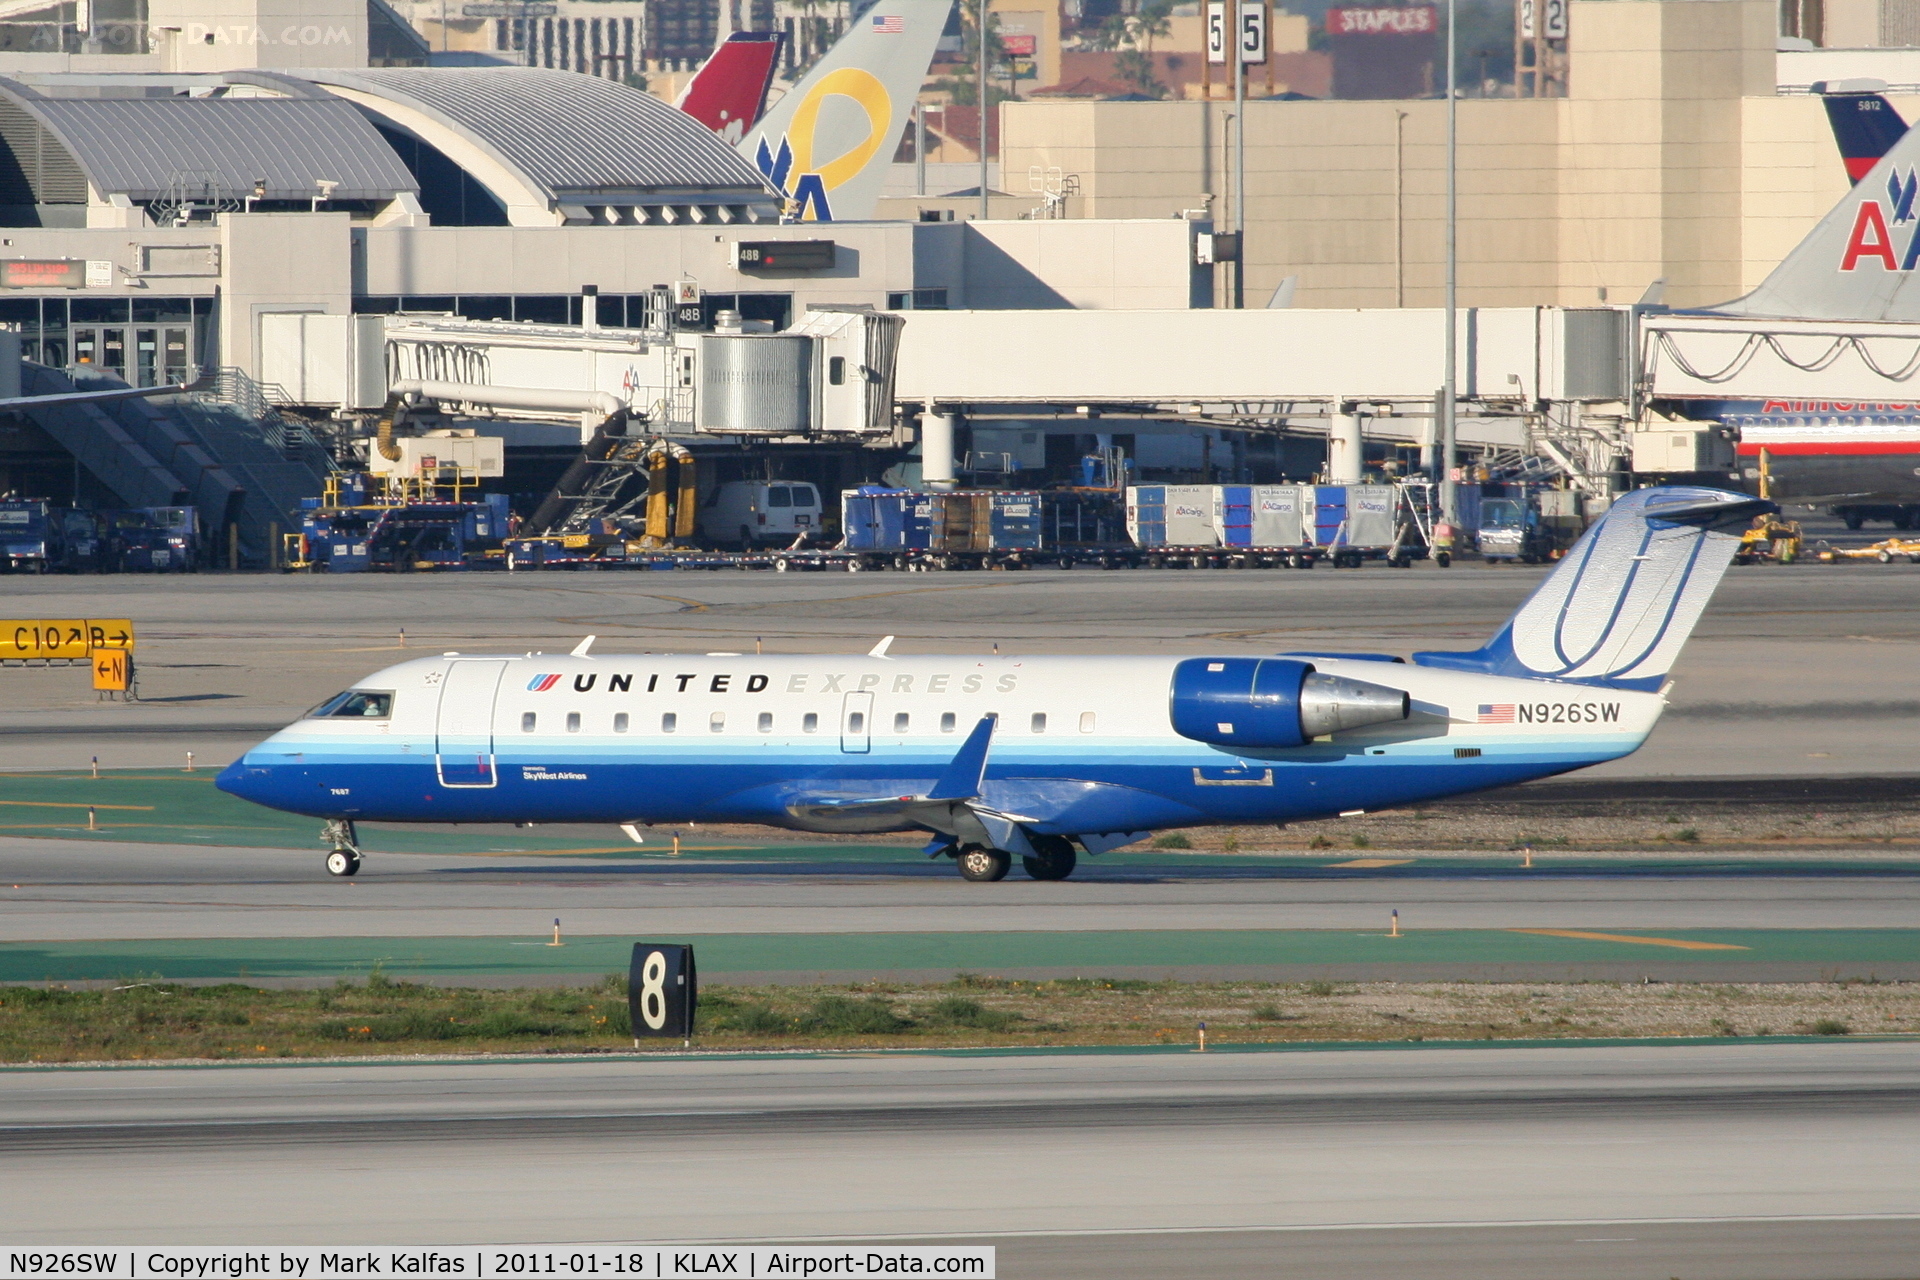 N926SW, 2002 Bombardier CRJ-200LR (CL-600-2B19) C/N 7687, SkyWest/United Express Bombardier CL-600-2B19, SKW6522 turning off of 25L at H8 KLAX after arriving from KPHX.